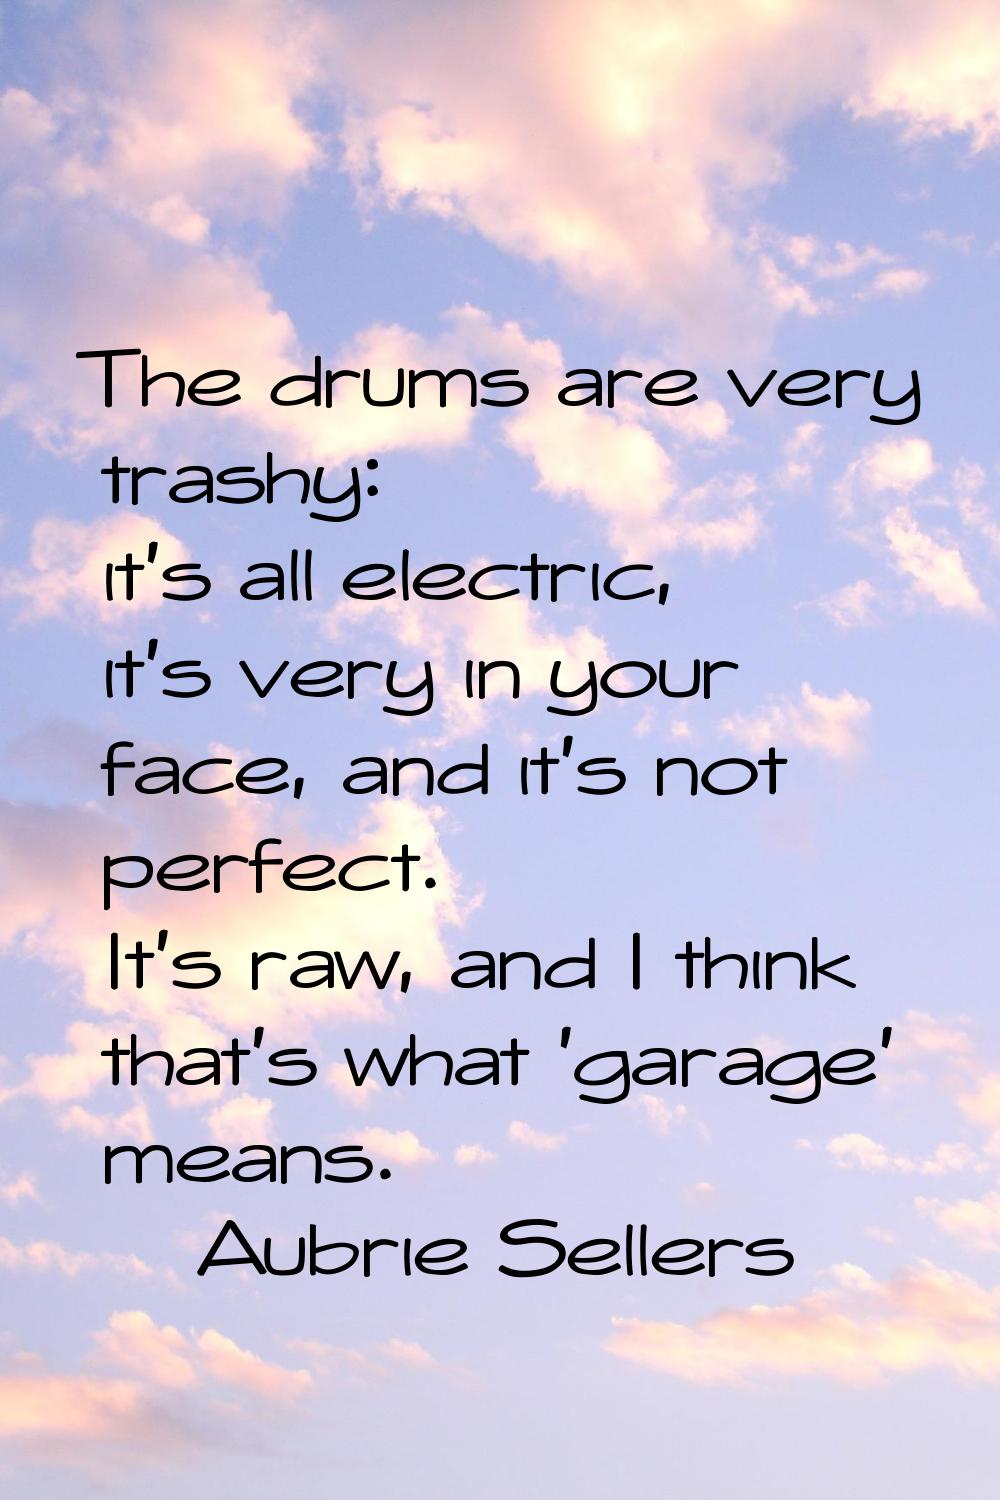 The drums are very trashy: it's all electric, it's very in your face, and it's not perfect. It's ra